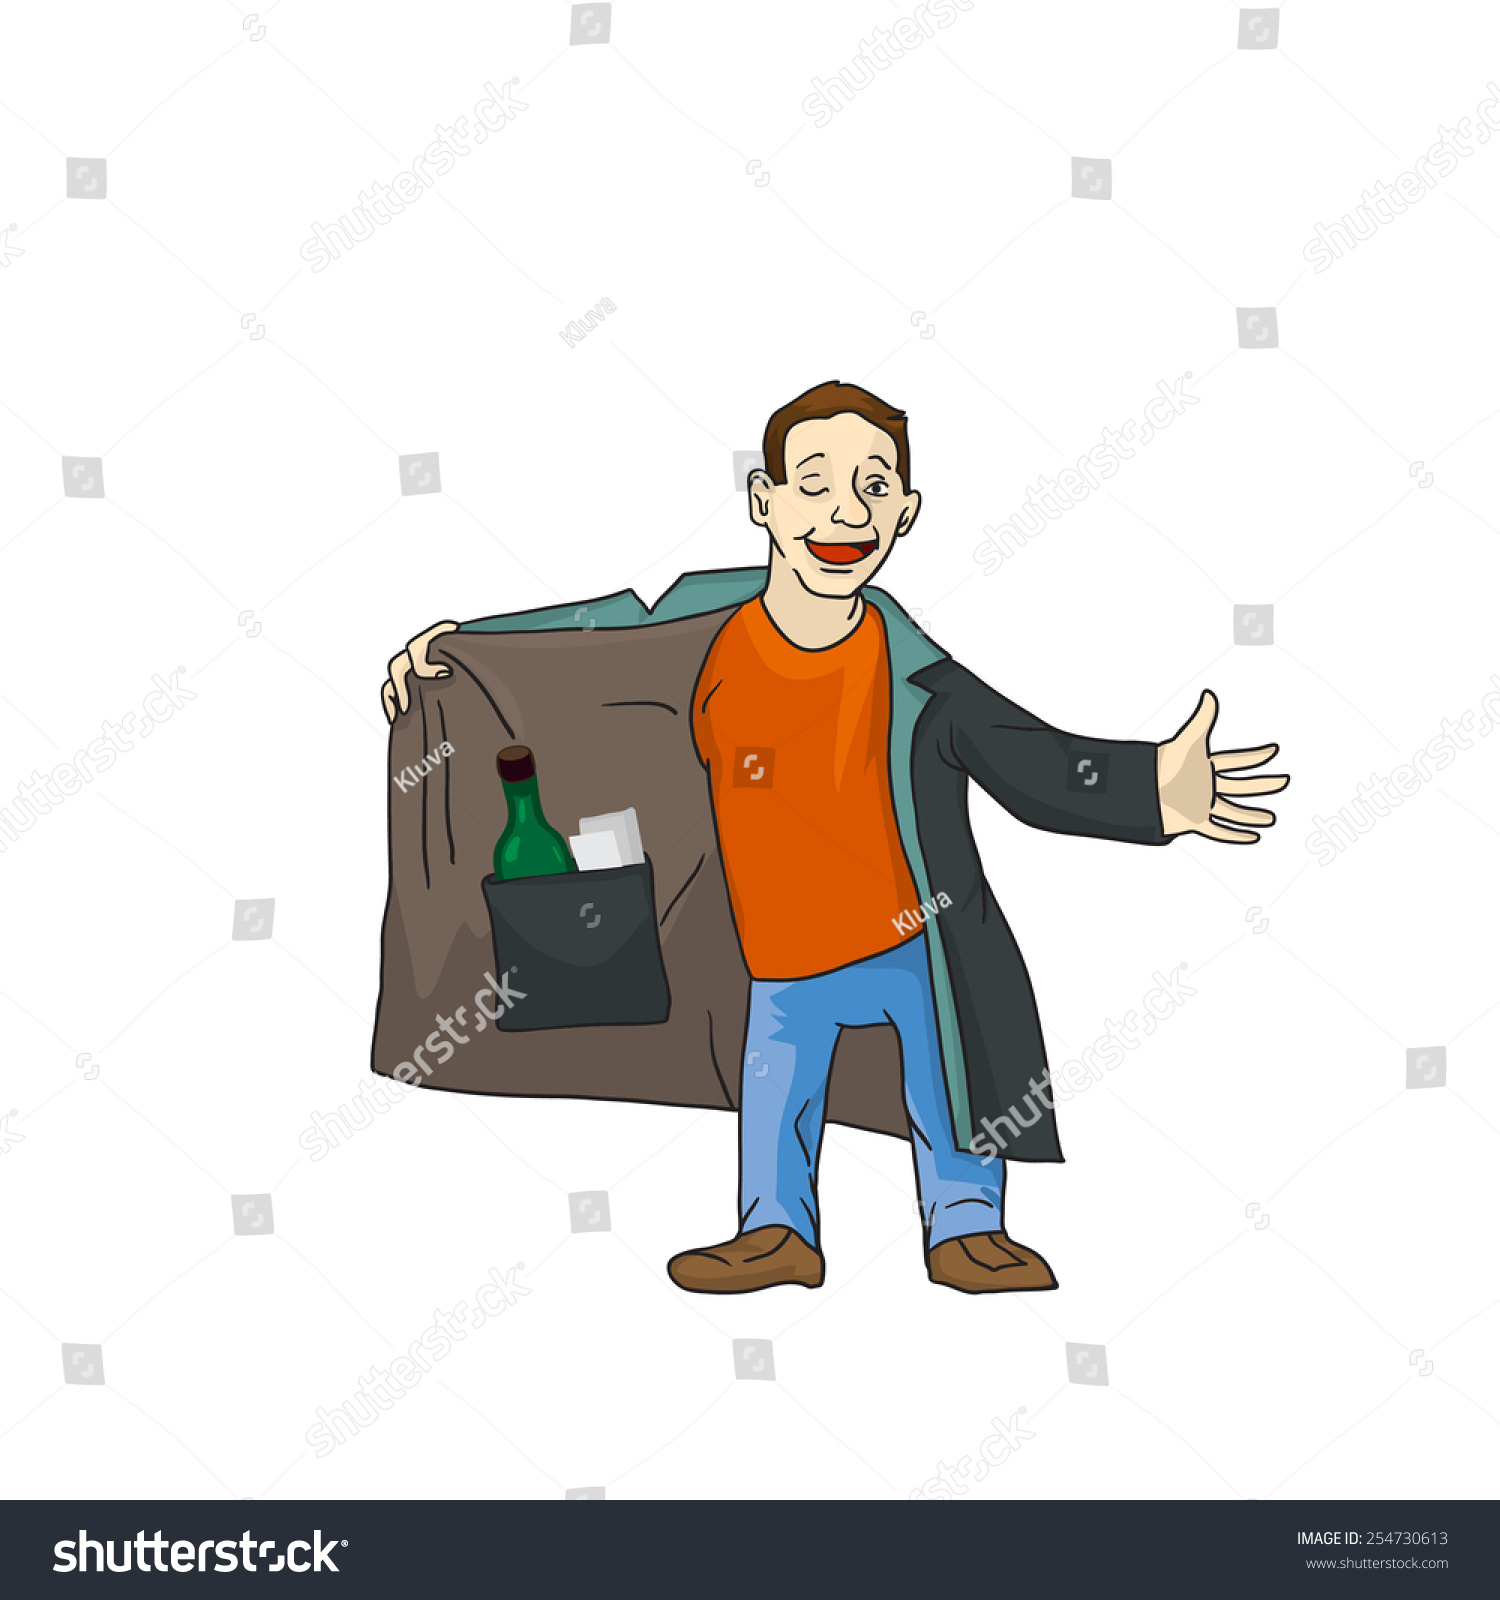 stock-vector-the-cartoon-suspicious-man-is-selling-the-forbidden-stuff-young-man-opens-his-coat-to-offer-some-254730613.jpg